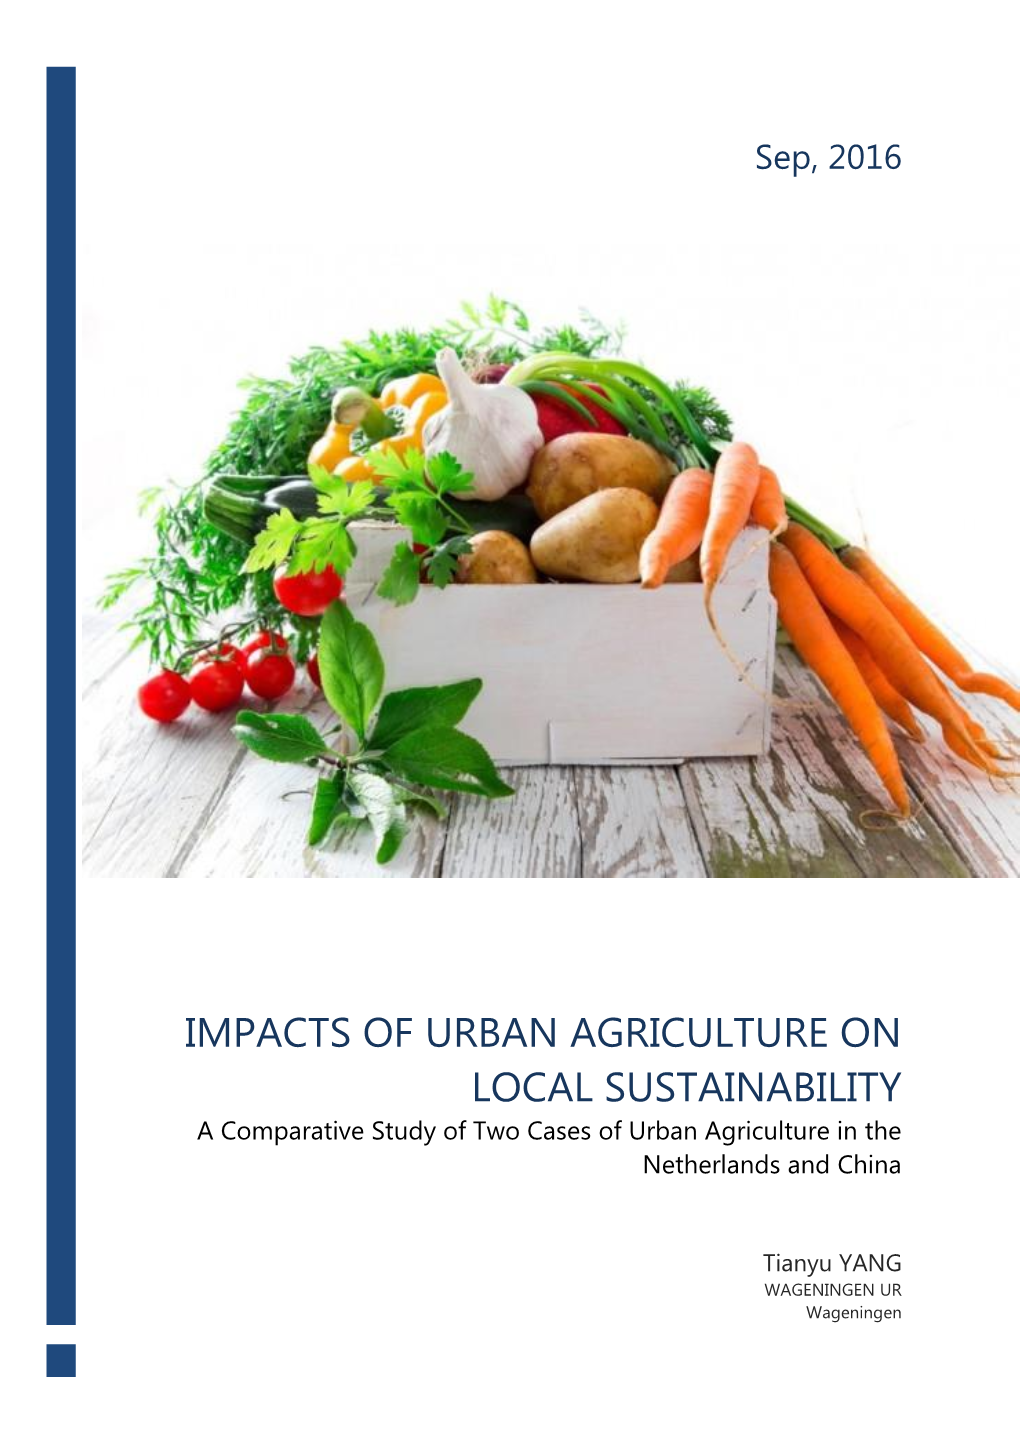 IMPACTS of URBAN AGRICULTURE on LOCAL SUSTAINABILITY a Comparative Study of Two Cases of Urban Agriculture in the Netherlands and China